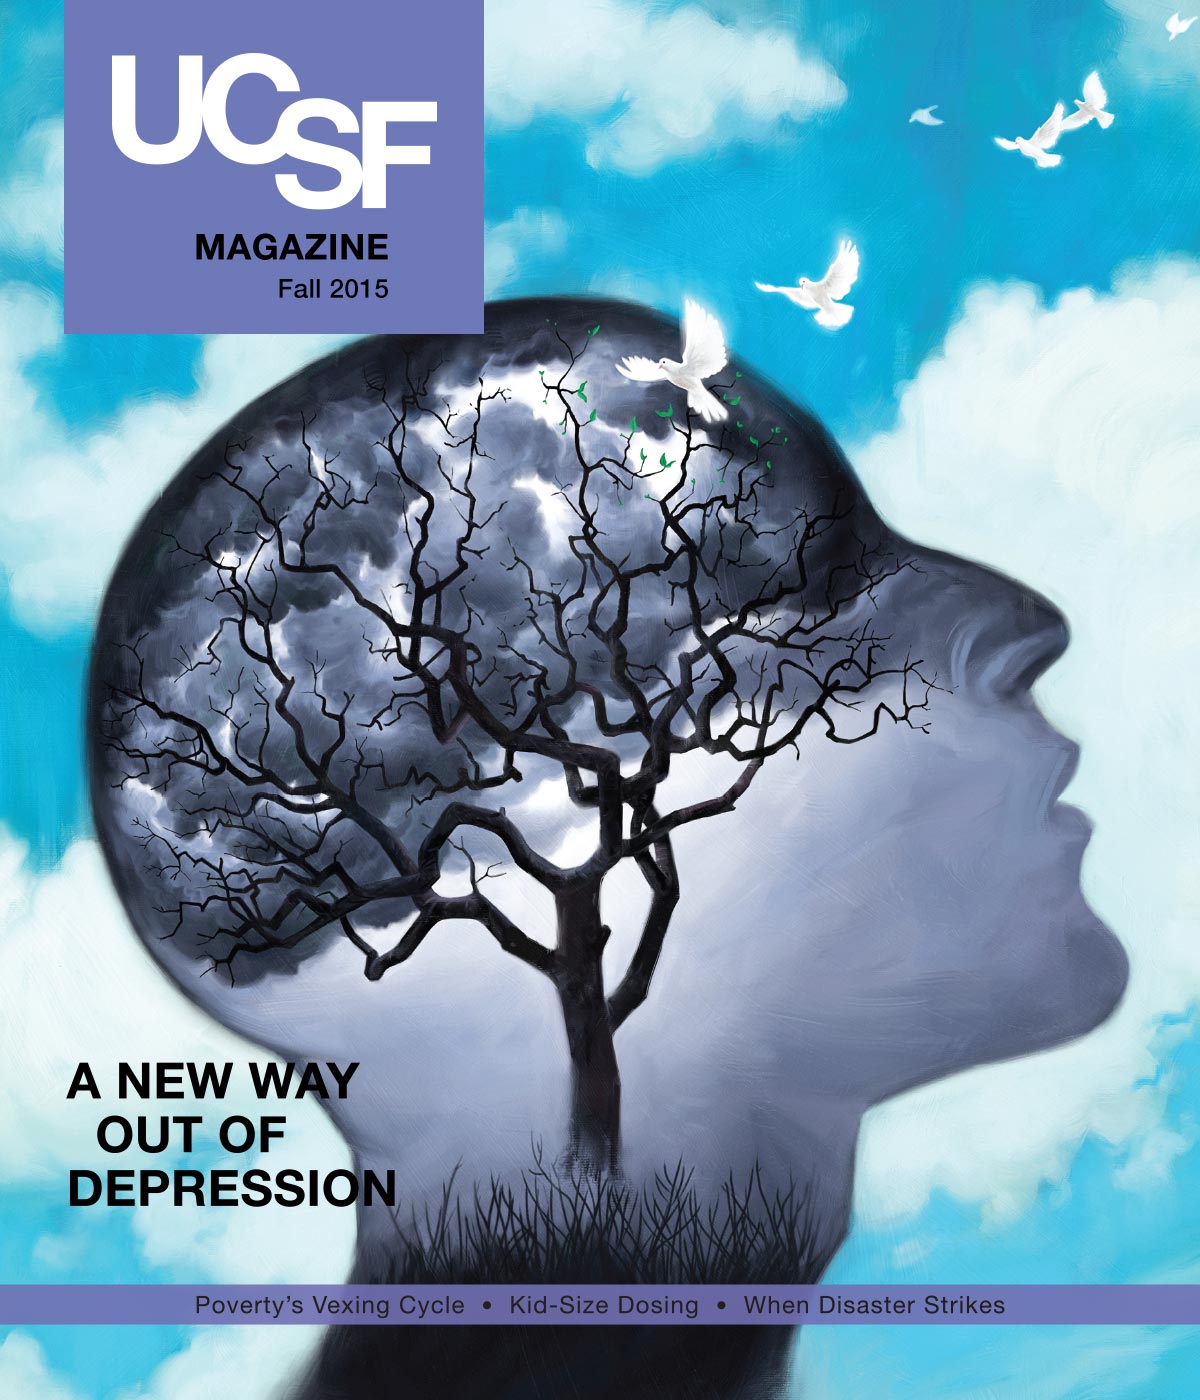 Cover of UCSF Magazine: left corner reads “UCSF Magazine, Fall 2015”. Illustration of the silhouette of a man; behind him is a beautiful blue sky with fluffy clouds; inside his head is a stormy scene where the brain would be with a tree branching out from the brain area; white birds fly in to the storm. Text next to photo reads: “A New Way Out of Depression”. Text below photo reads: “Poverty’s Vexing Cycle; Kid-Size Dosing; When Disaster Strikes”